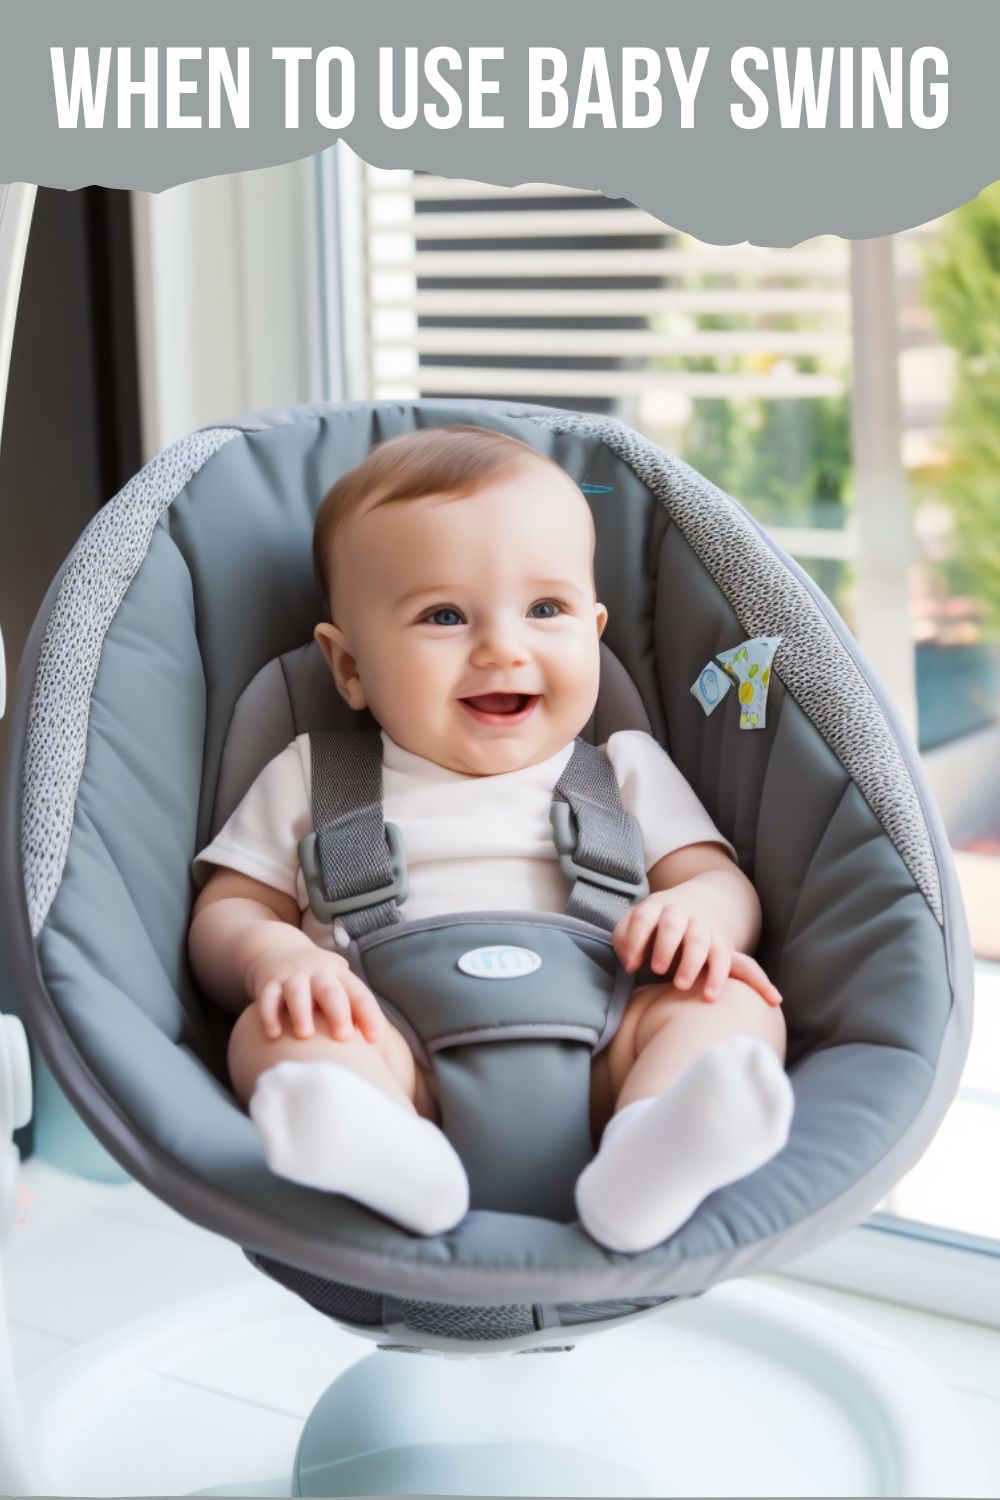 When To Use Baby Swing